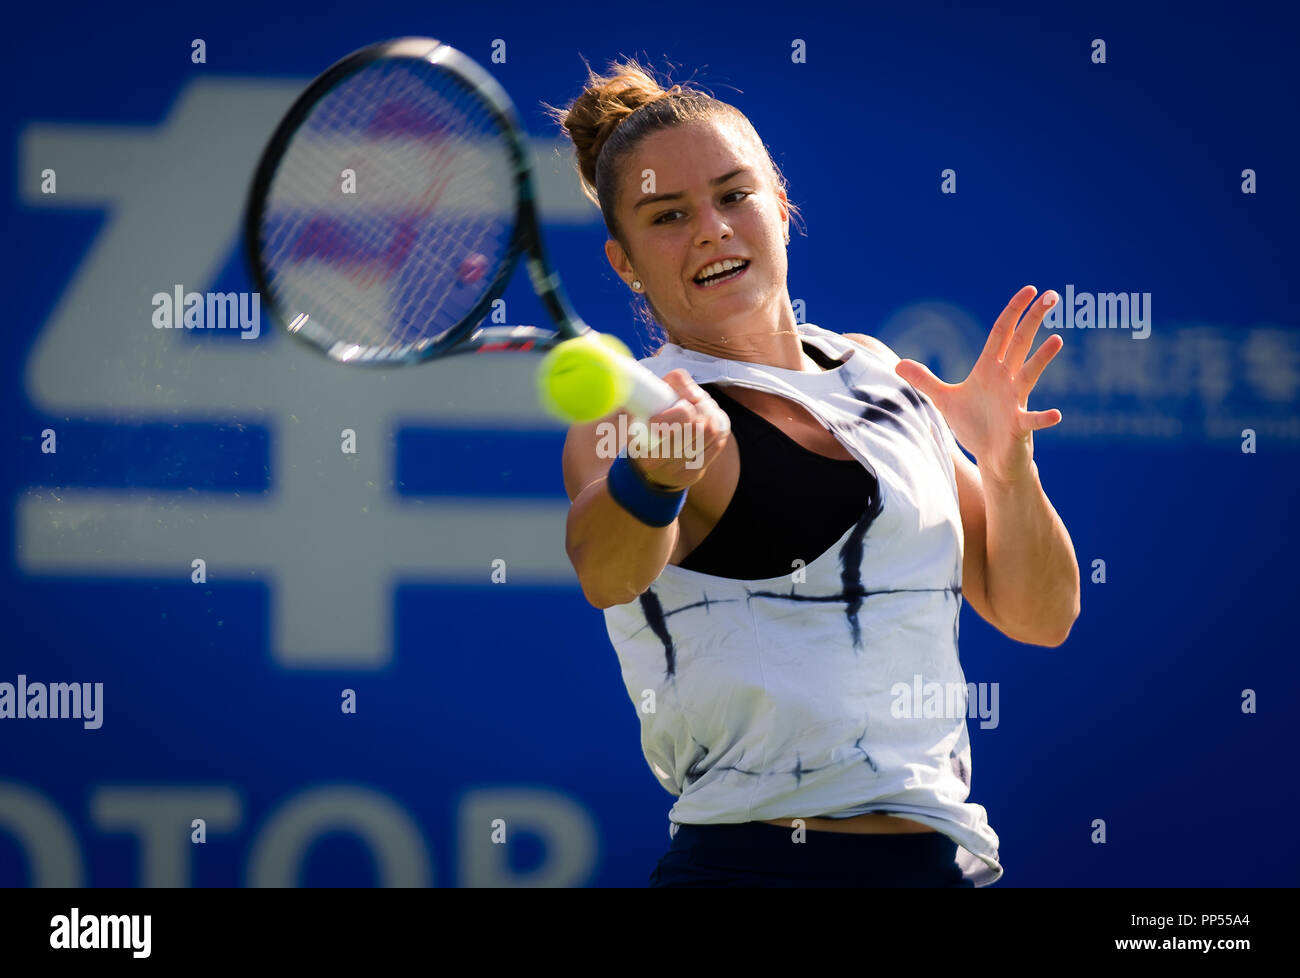 Wuhan, China. Wuhan, China. September 23, 2018 - Maria Sakkari of Greece  practices at the 2018 Dongfeng Motor Wuhan Open WTA Premier 5 tennis  tournament Credit: AFP7/ZUMA Wire/Alamy Live News Stock Photo - Alamy